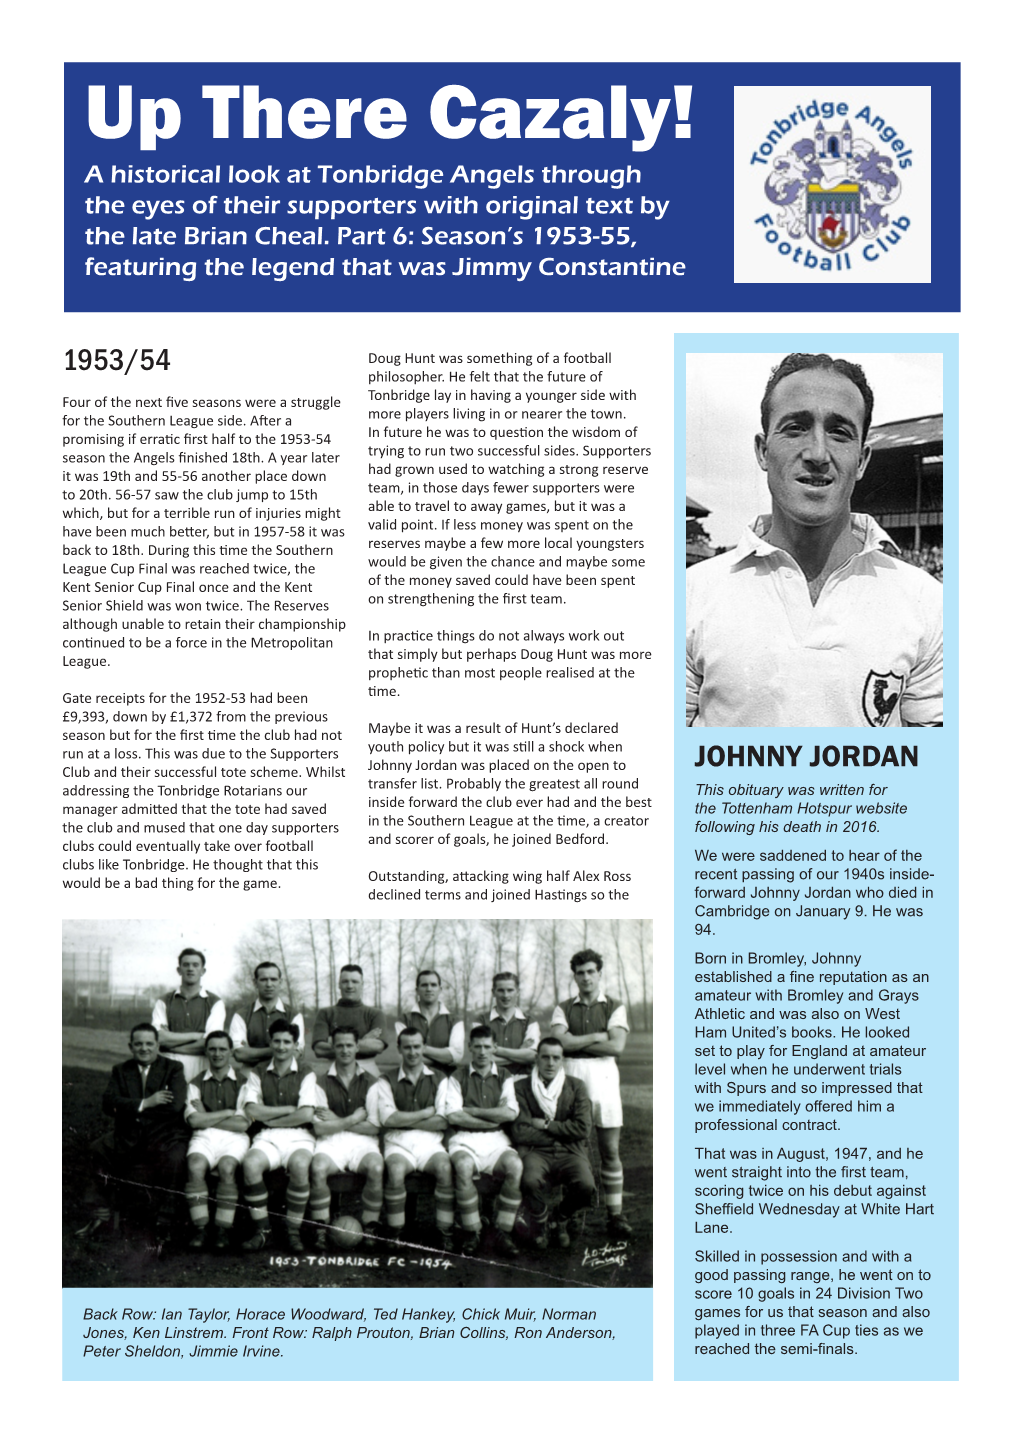 Up There Cazaly! a Historical Look at Tonbridge Angels Through the Eyes of Their Supporters with Original Text by the Late Brian Cheal